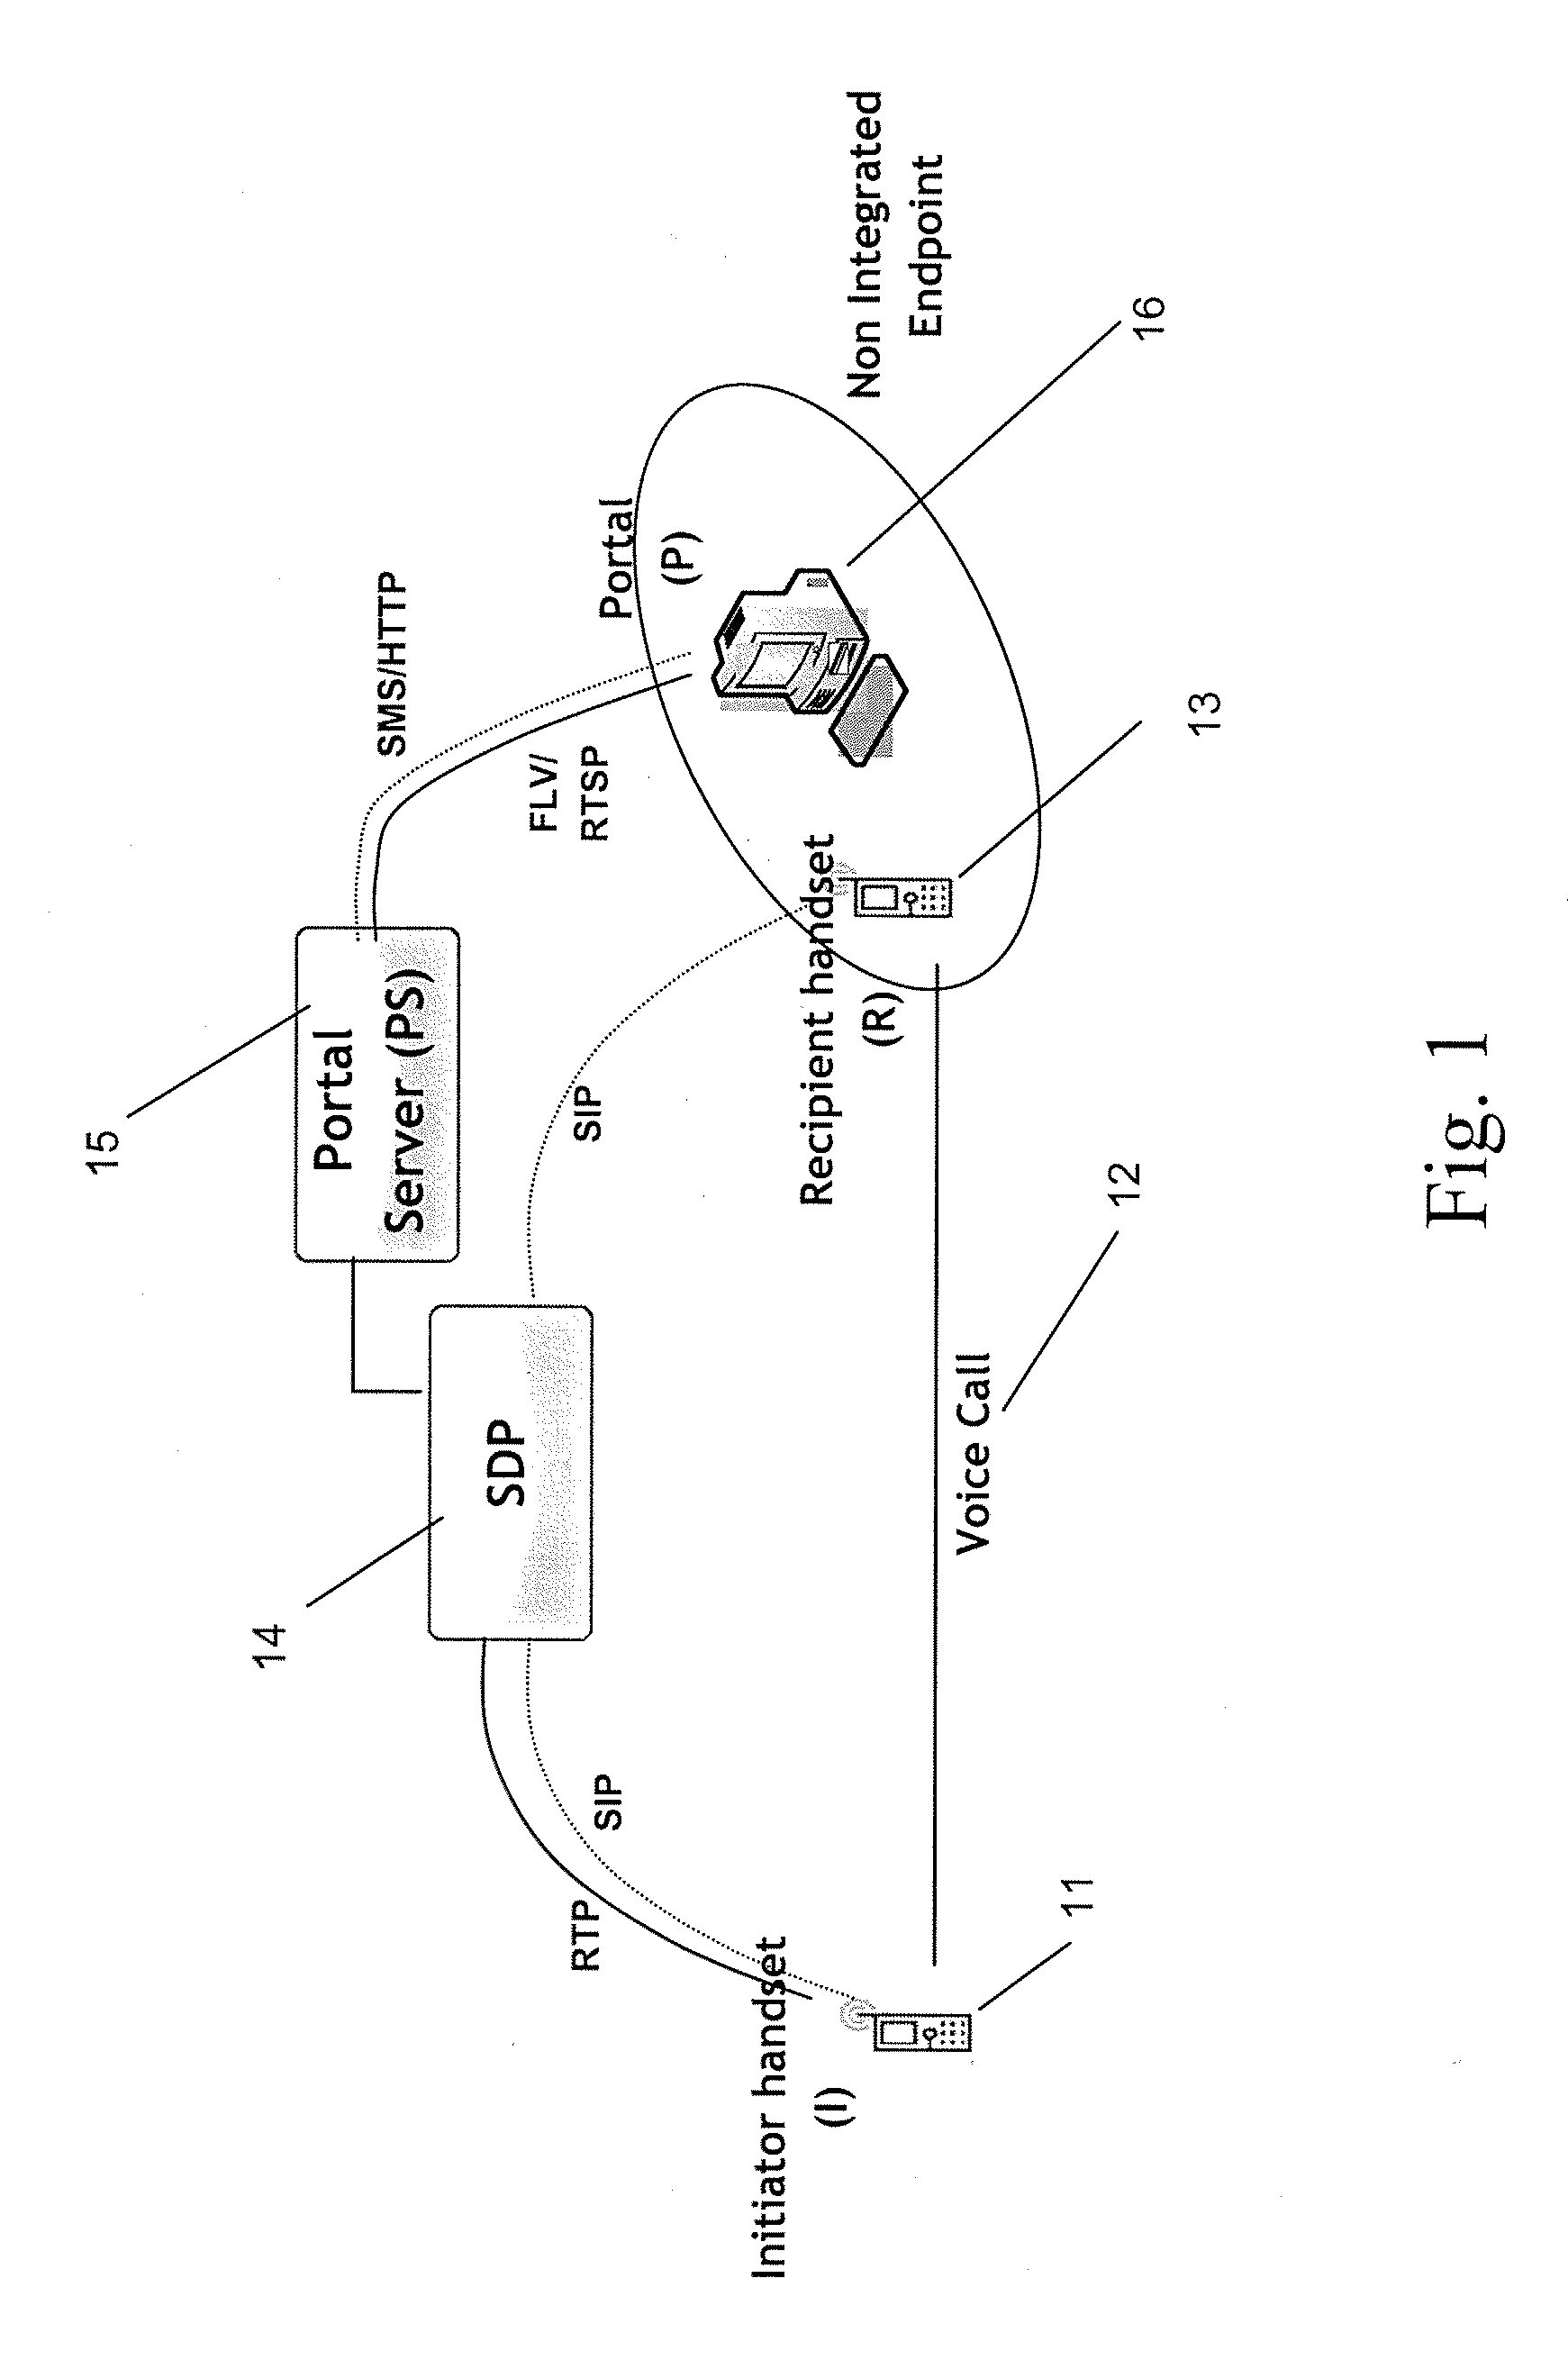 Systems and Methods for Real-Time Cellular-to-Internet Video Transfer